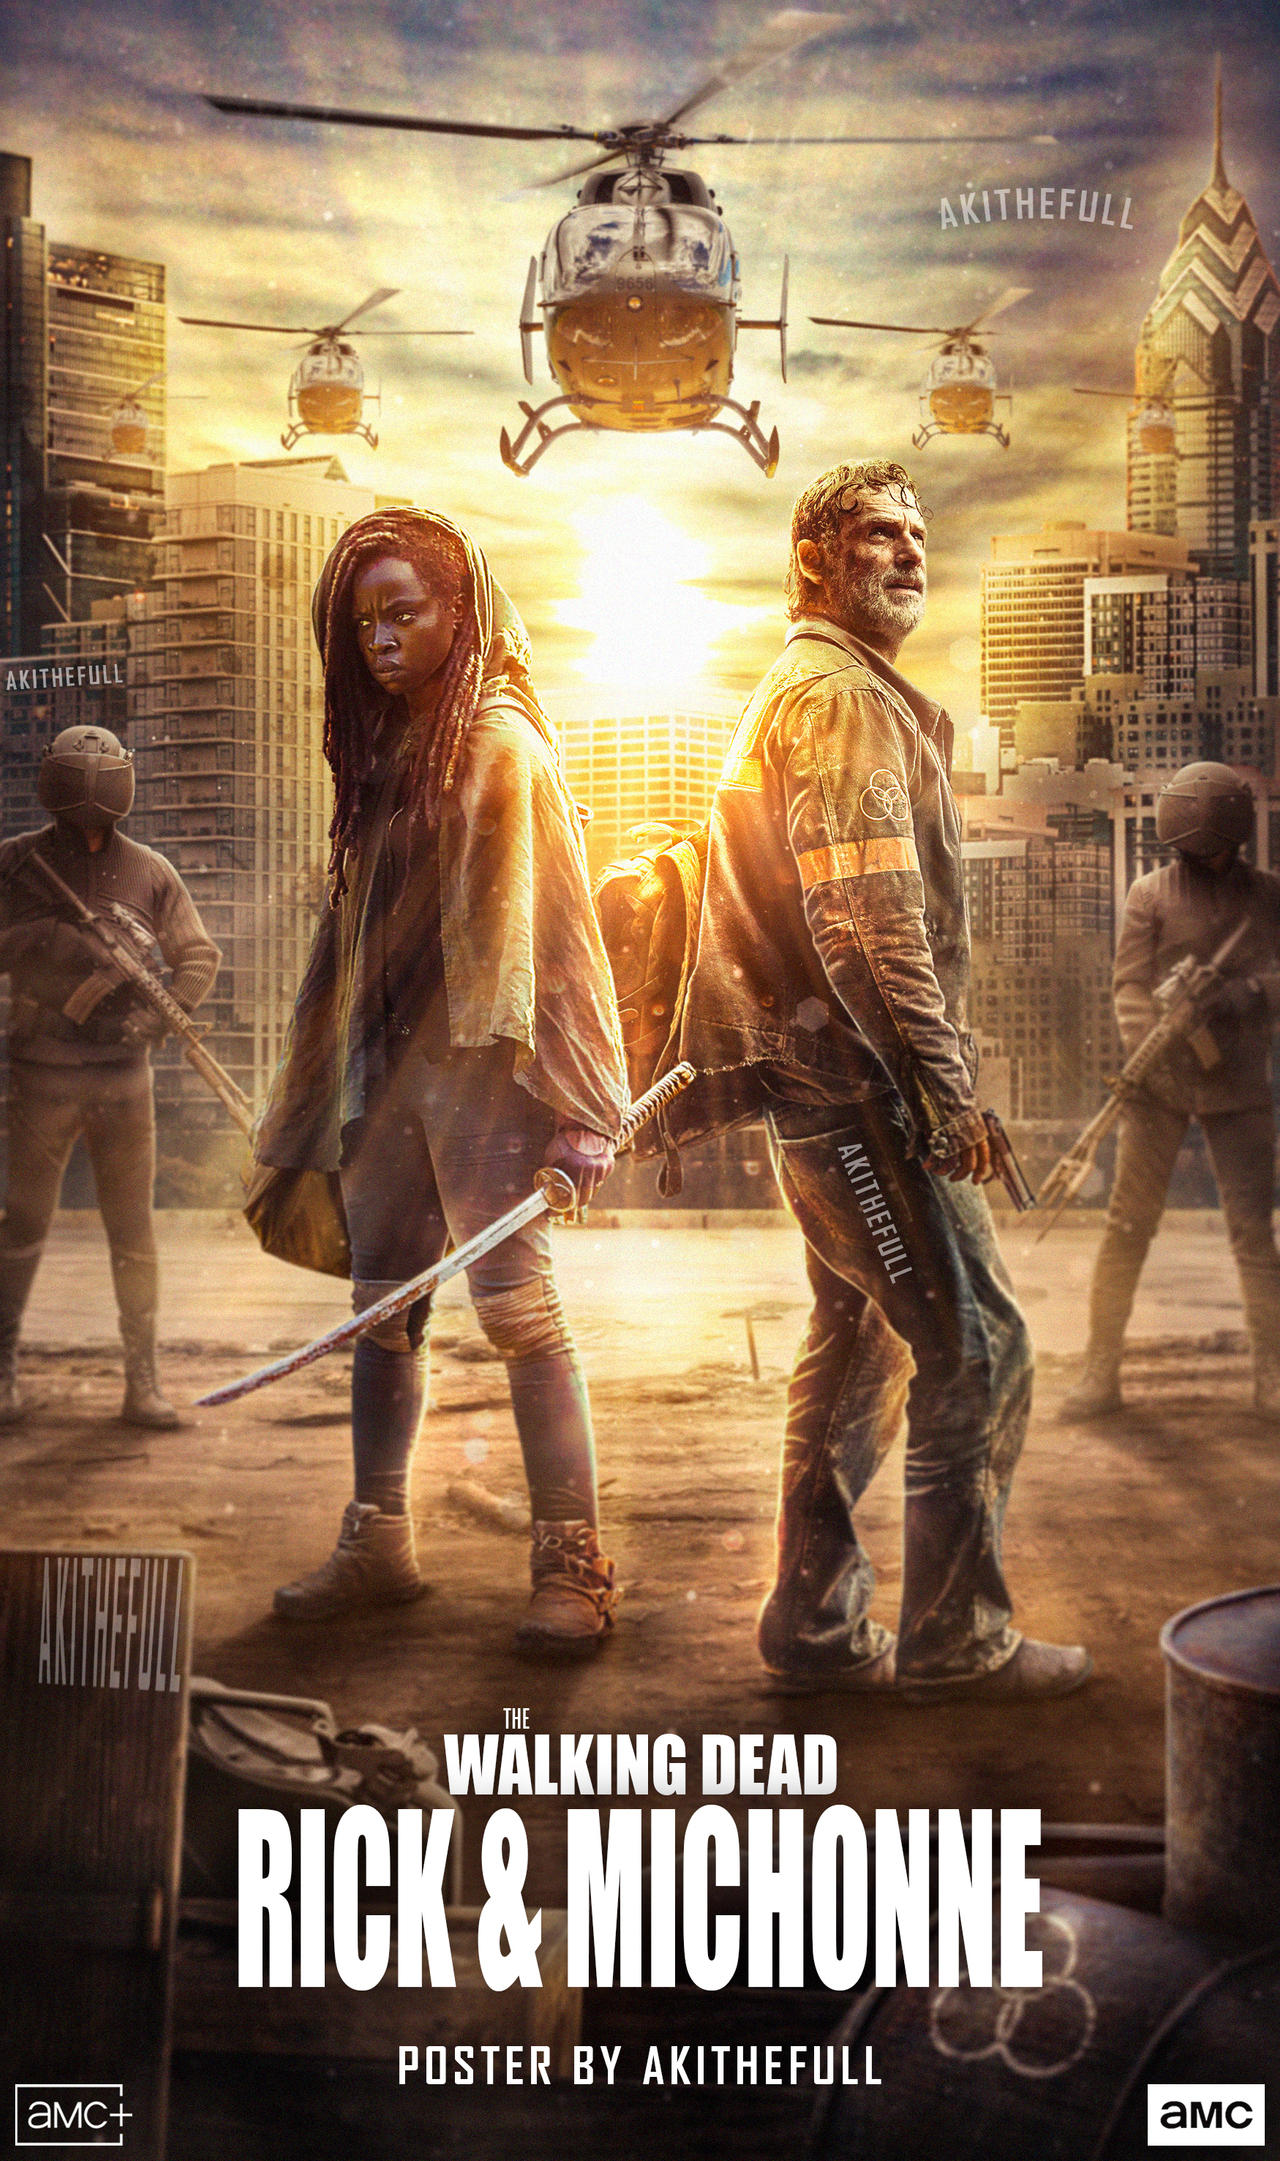 The Walking Dead Rick And Michonne Poster by AkiTheFull on DeviantArt